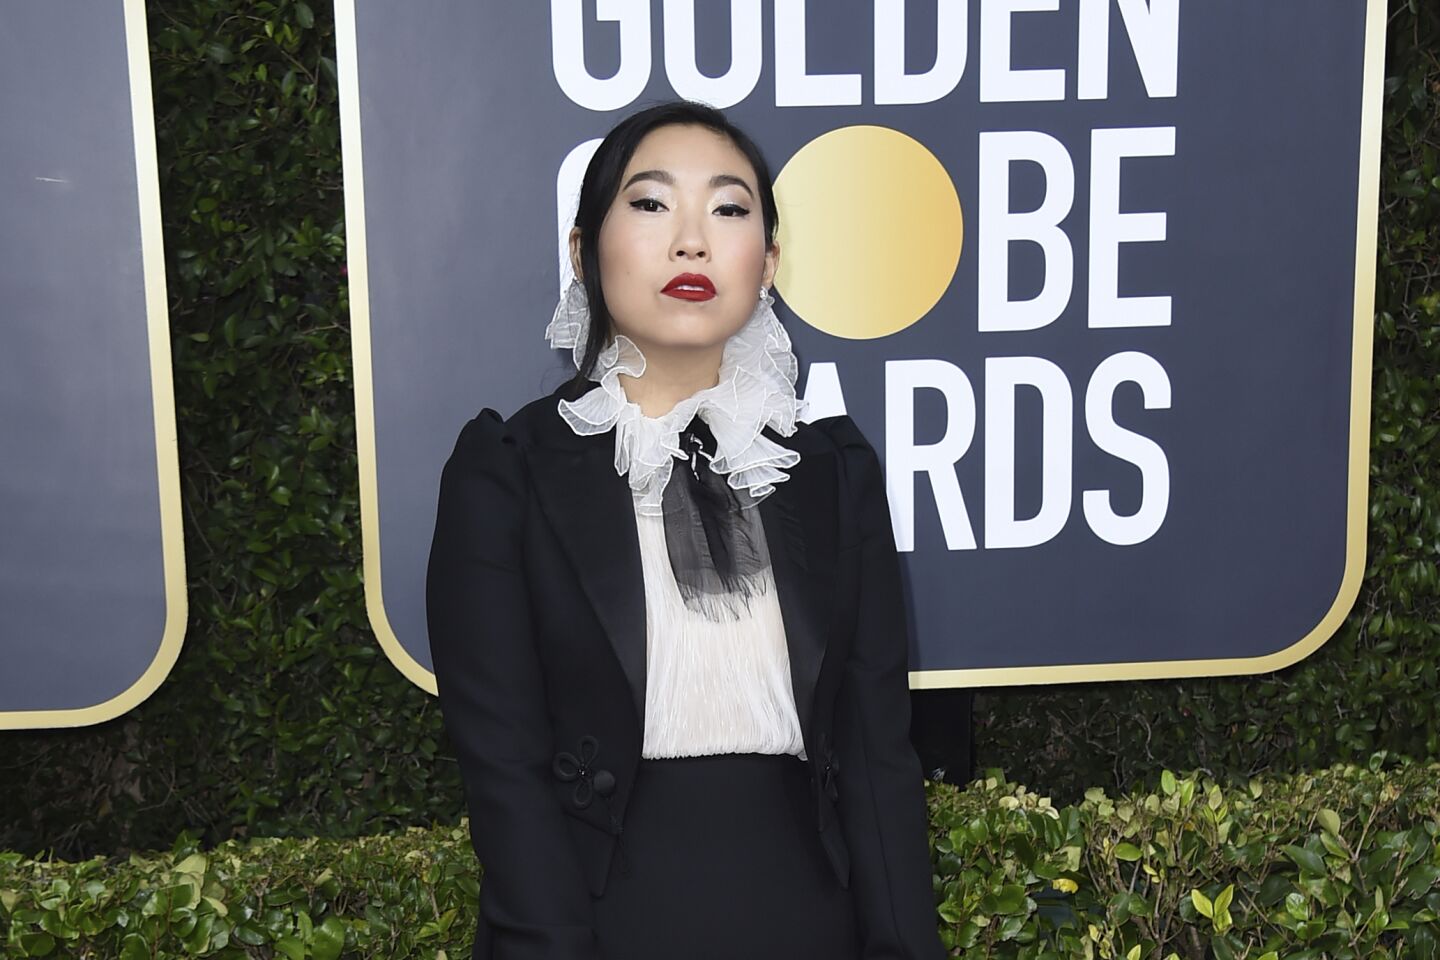 On the fence: Awkwafina